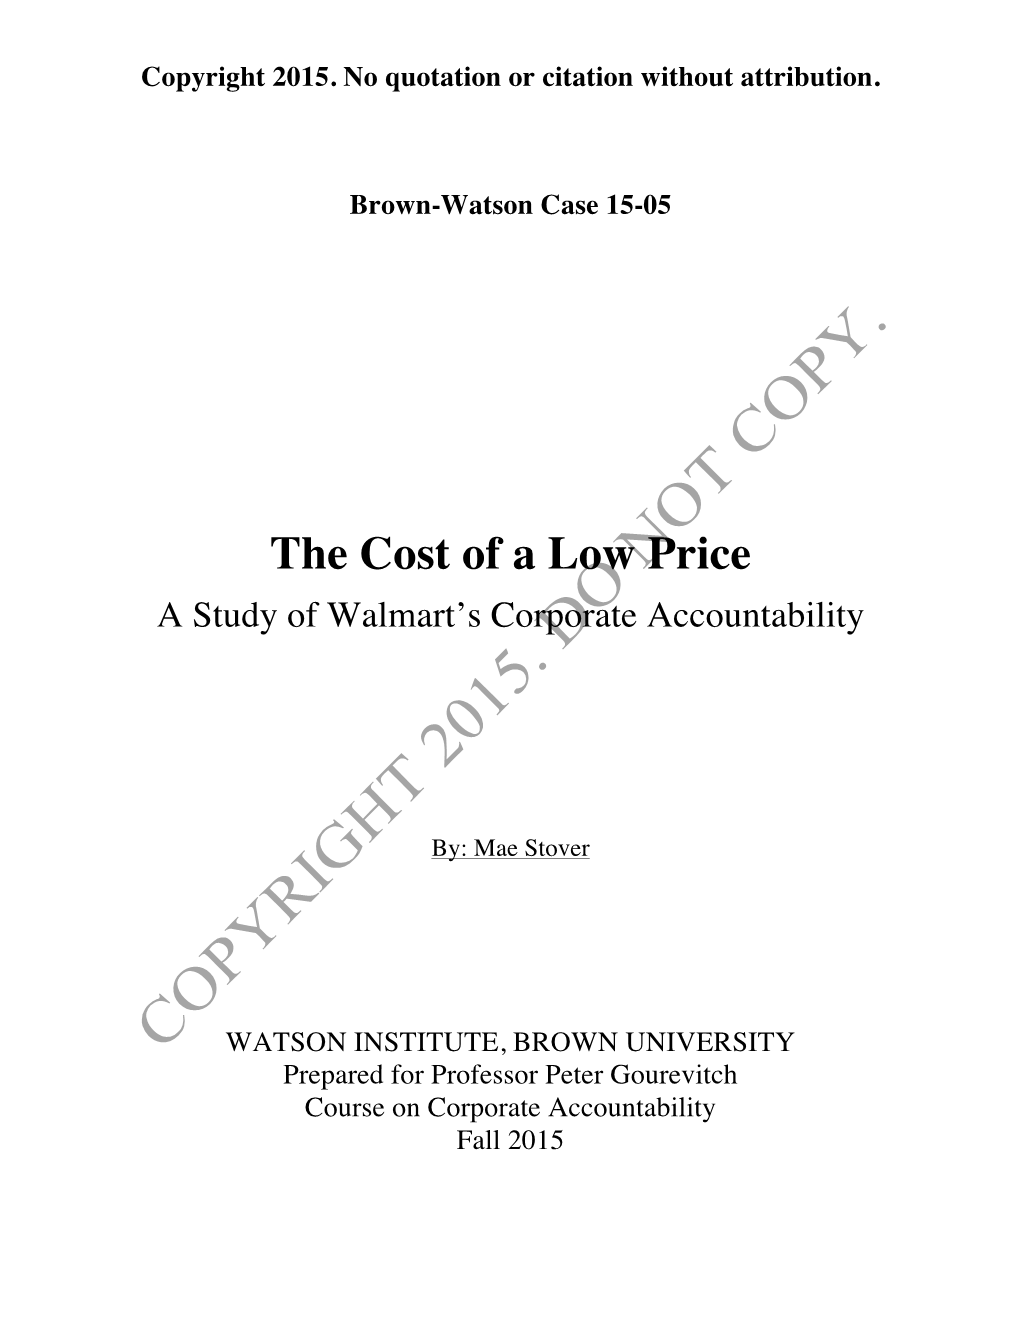 The Cost of a Low Price a Study of Walmart’S Corporate Accountability